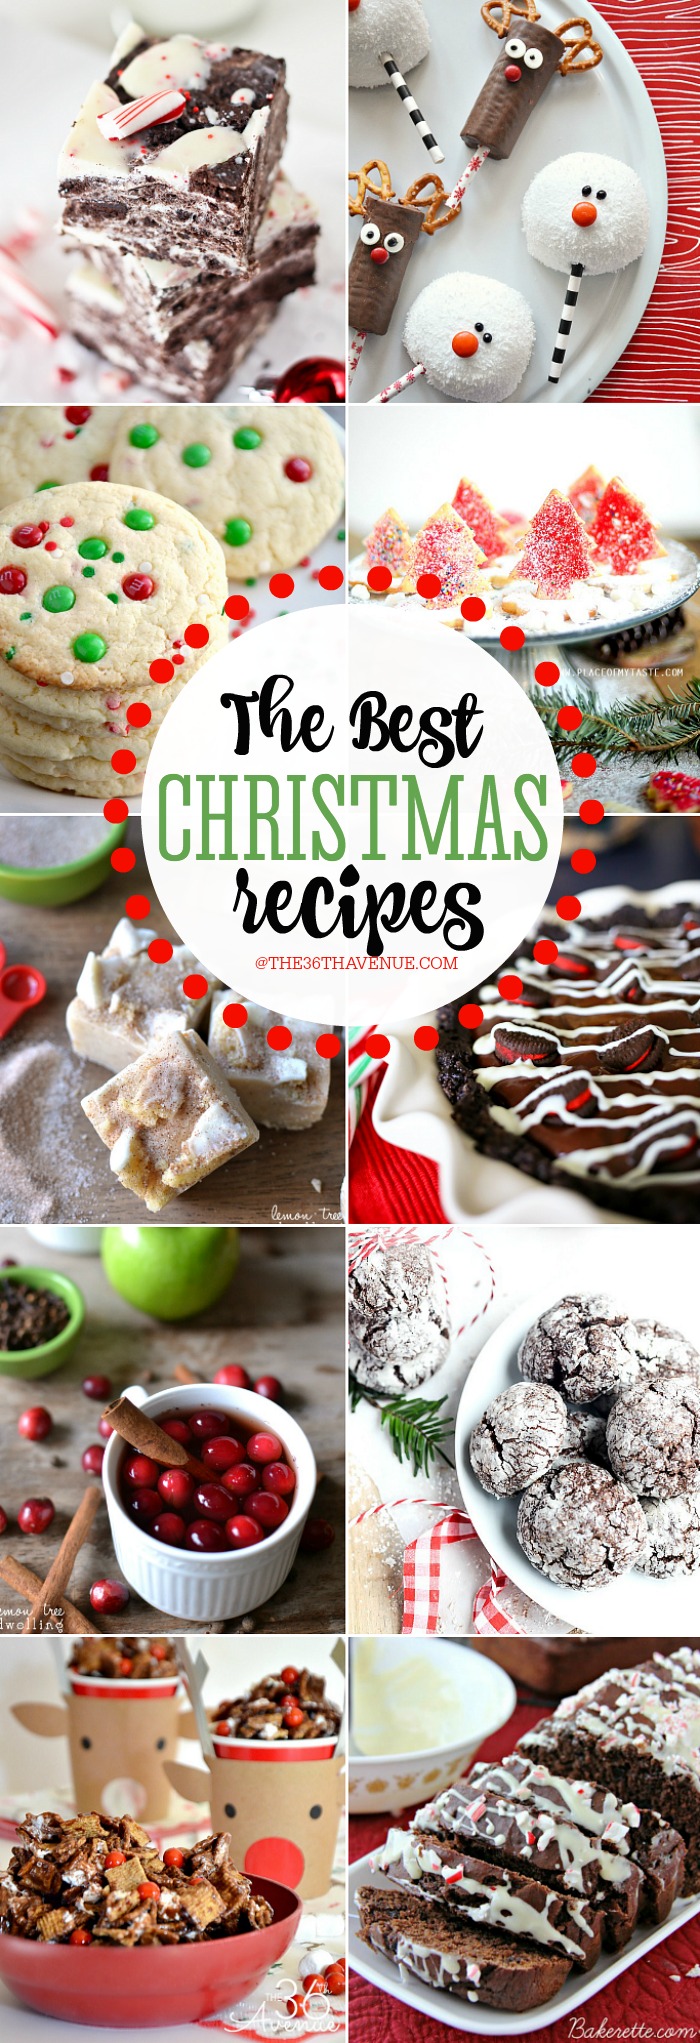 Christmas Recipes - These dessert recipes are perfect for everyday snacks, to give as Christmas Edible Gifts, or to make anytime that your are craving something sweet and delicious! Surprise your family and friends with any of these yummy Christmas Treats! PIN IT NOW and make them later!